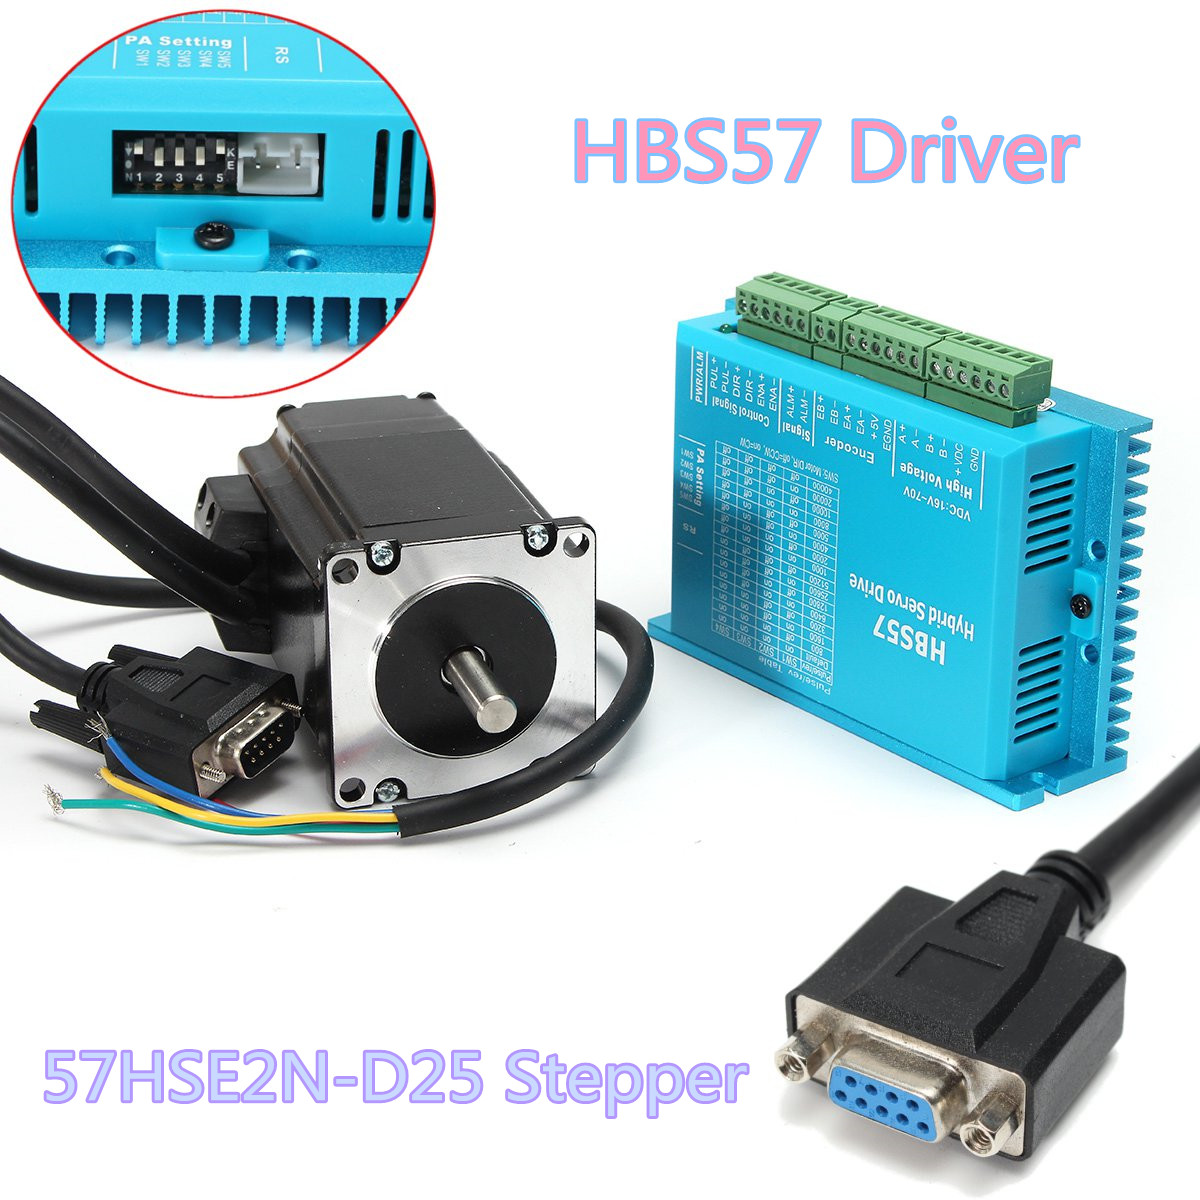 High Speed Closed Loop Stepper Motor + HBS57 Stepper Driver + Coding Cable Kit 5